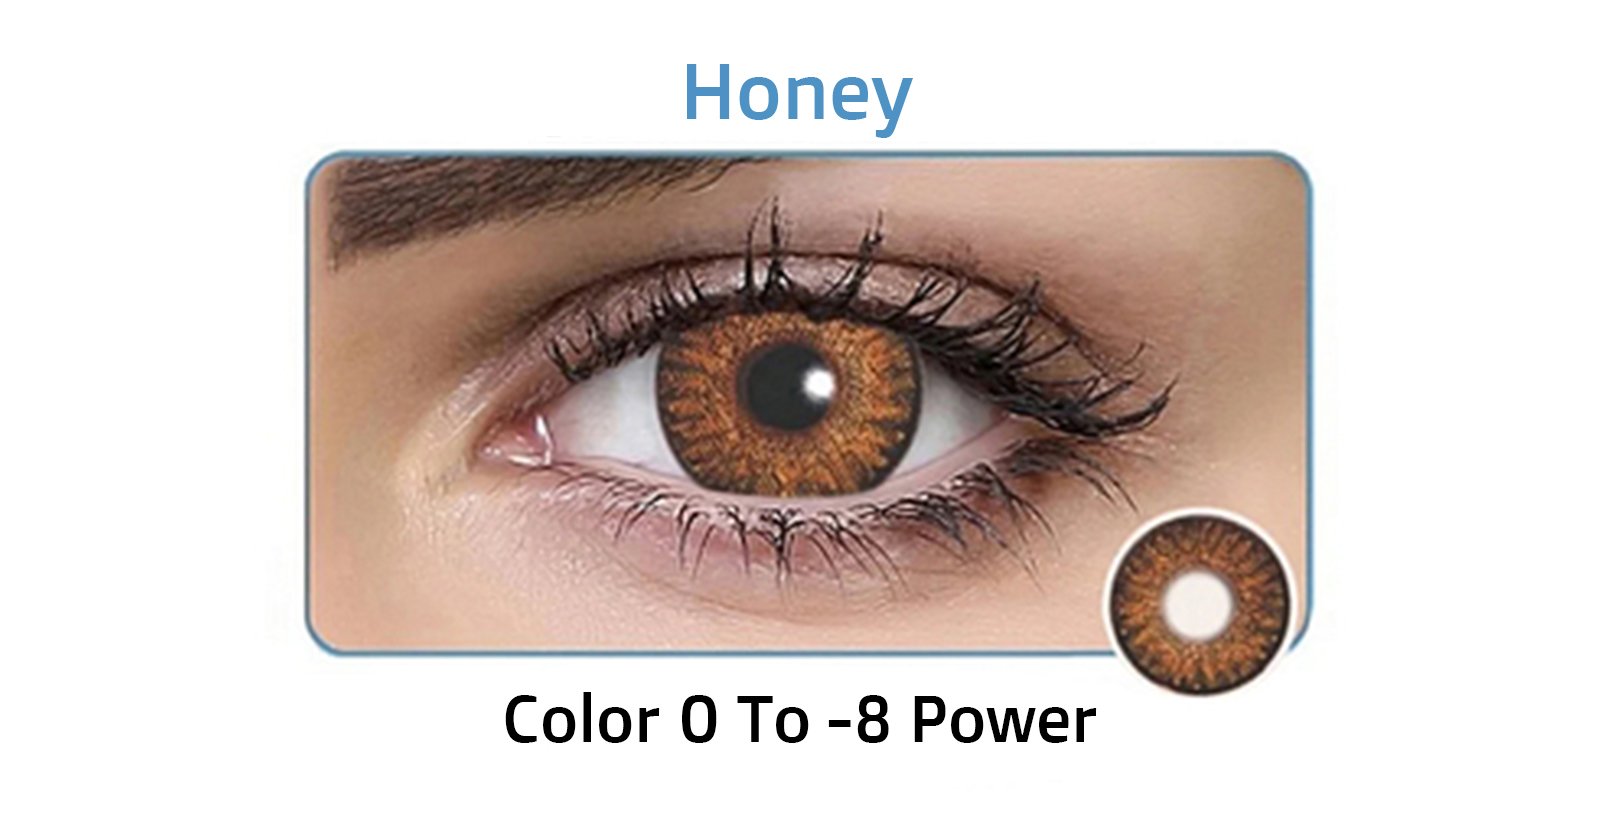 Freshlook Colorblends Monthly Disposable Honey Color